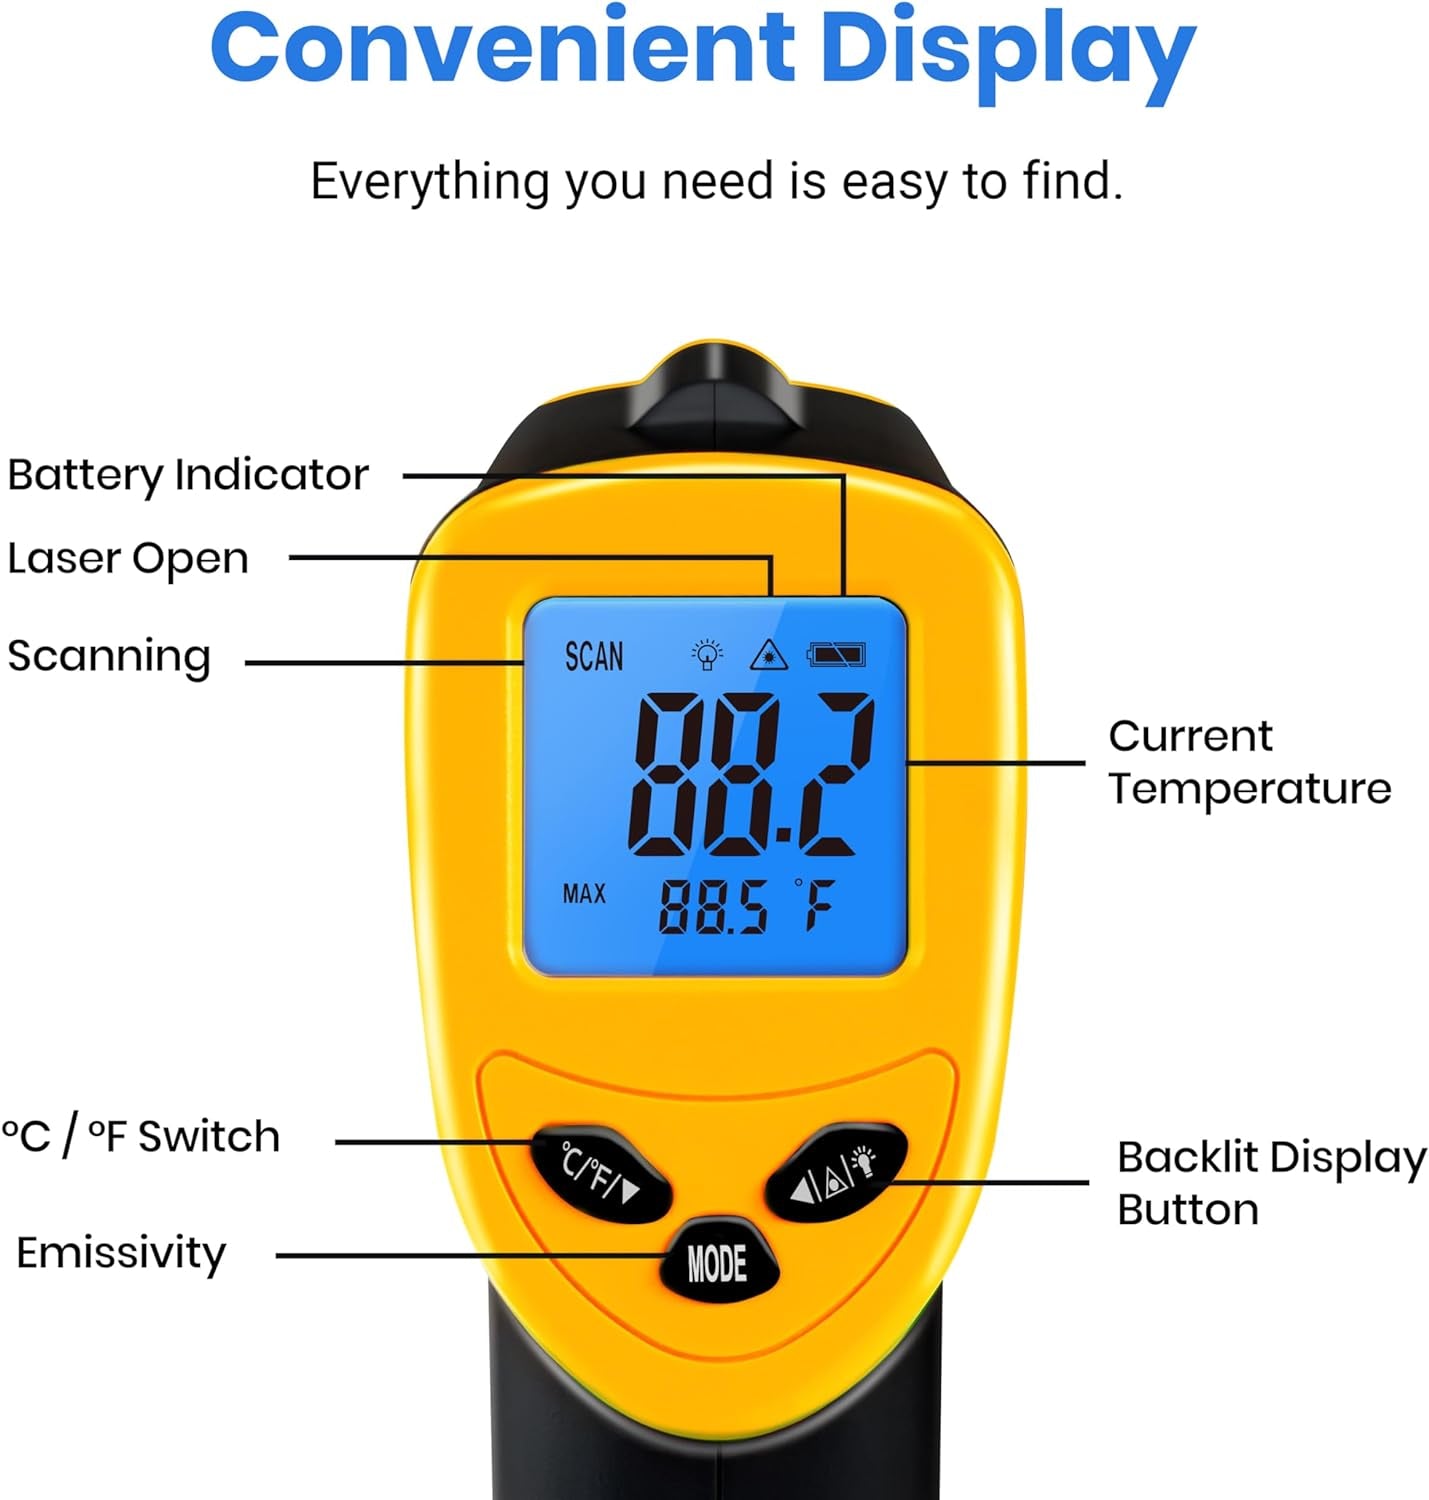 Etekcity Infrared Thermometer Temperature Gun for Pool Refrigerator, -58°F to 1130°F, Digital Heat Gun for Cooking Meat Pizza Oven, Laser Tool for Indoor Outdoor Candy, Griddle, Yellow